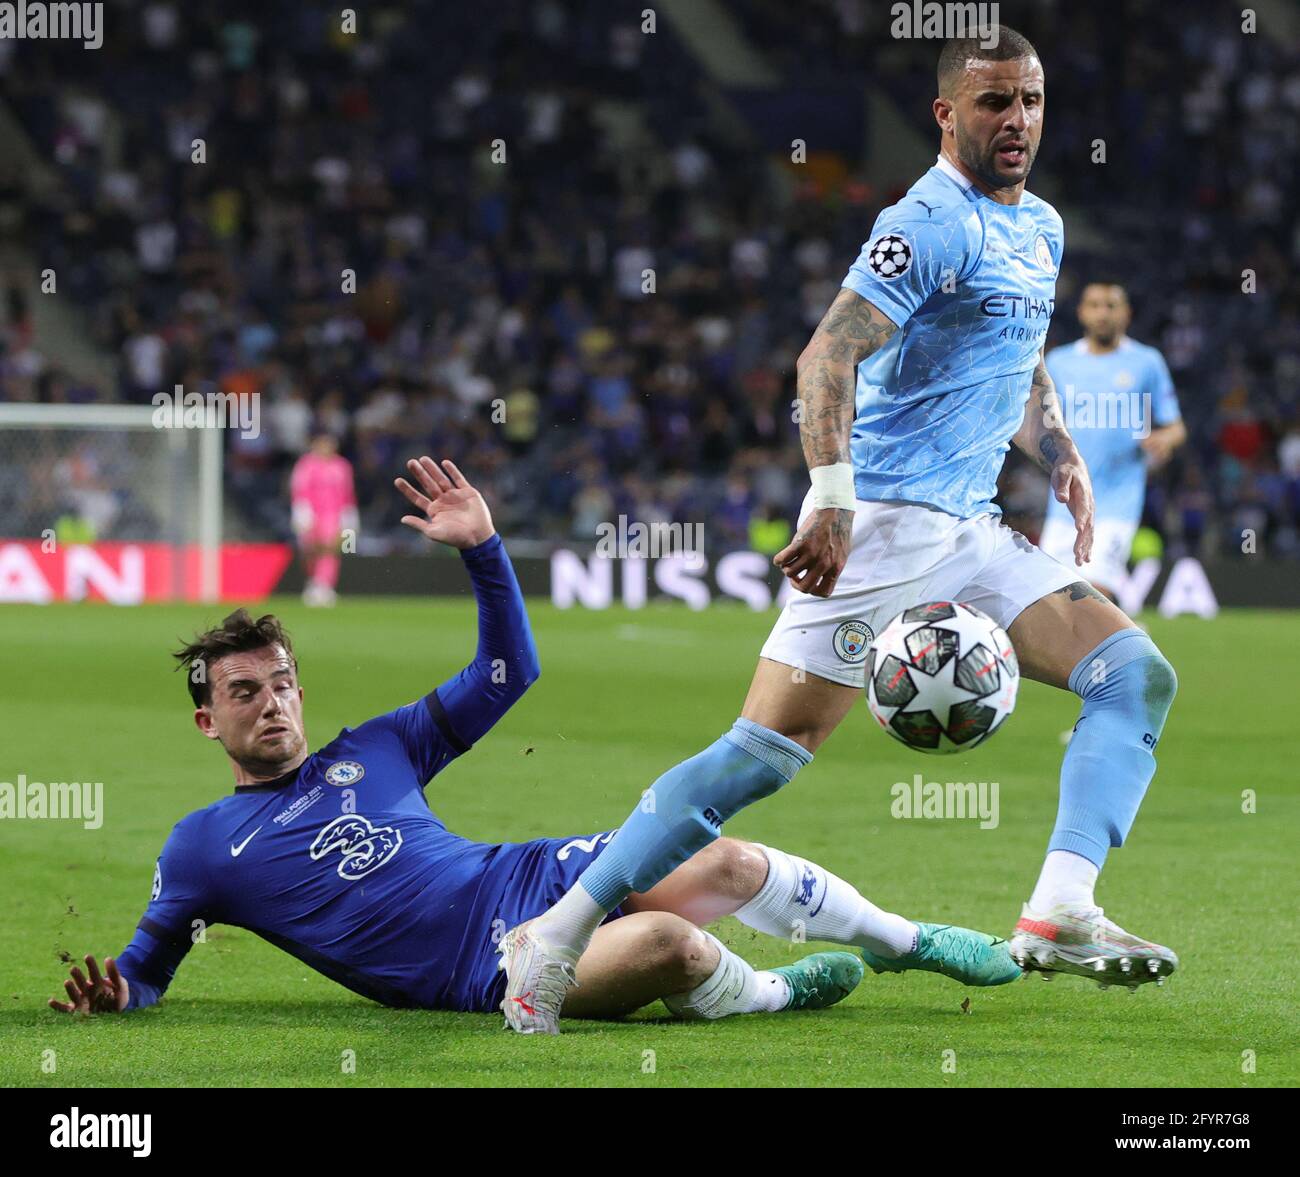 PORTO, PORTUGAL - MAY 29: Kyle Walker of Manchester City is tackled by Ben Chilwell of Chelsea during the UEFA Champions League Final between Manchester City and Chelsea FC at Estadio do Dragao on May 29, 2021 in Porto, Portugal. (Photo by MB Media) Stock Photo